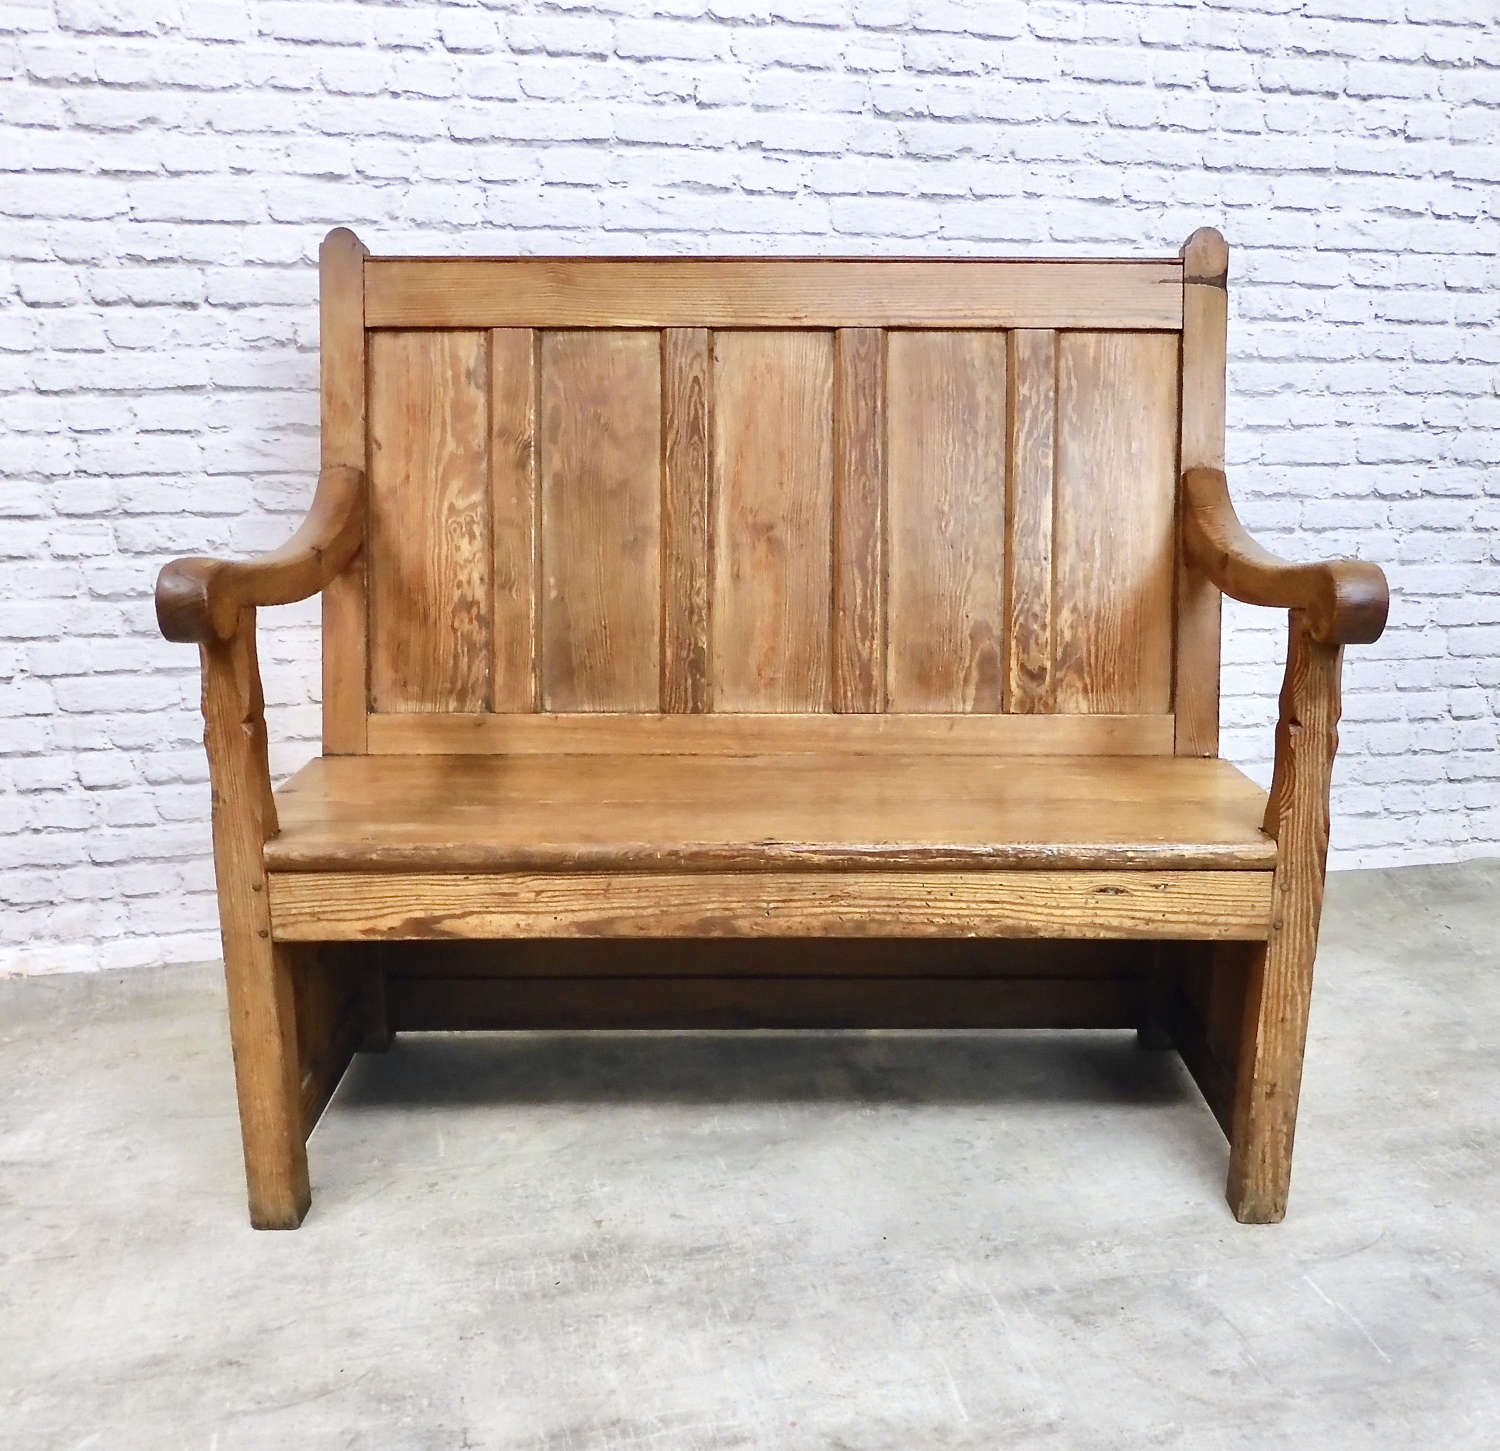 Small Pine Bench Seat